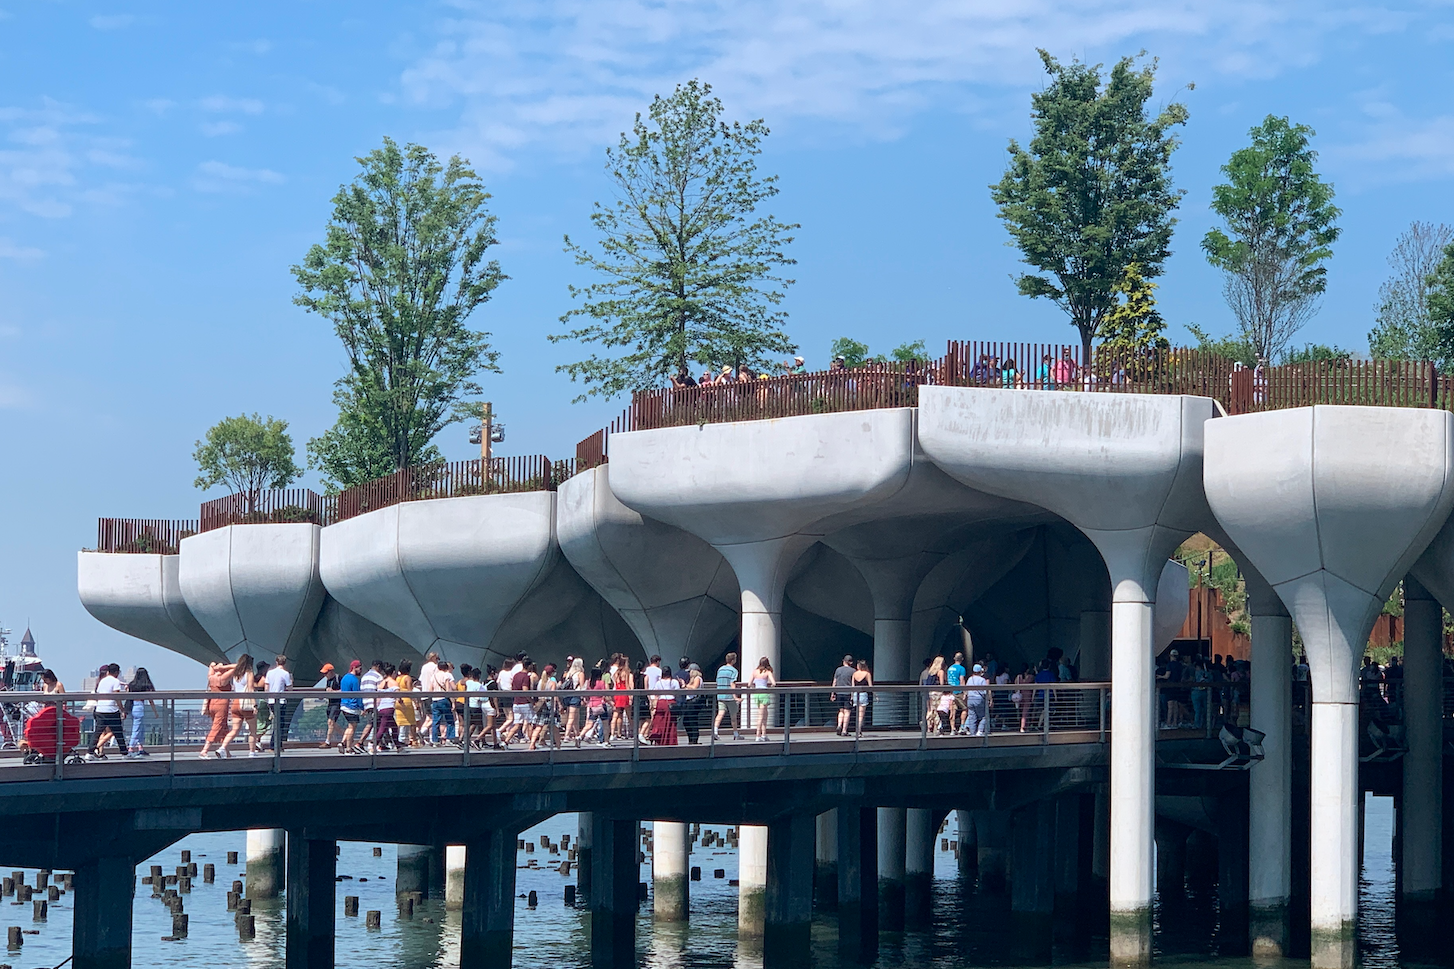 Visitors walk along a gangway to Little Island, which is made up of concrete potlike structures suspended above the Hudson River and grouped together to form a park